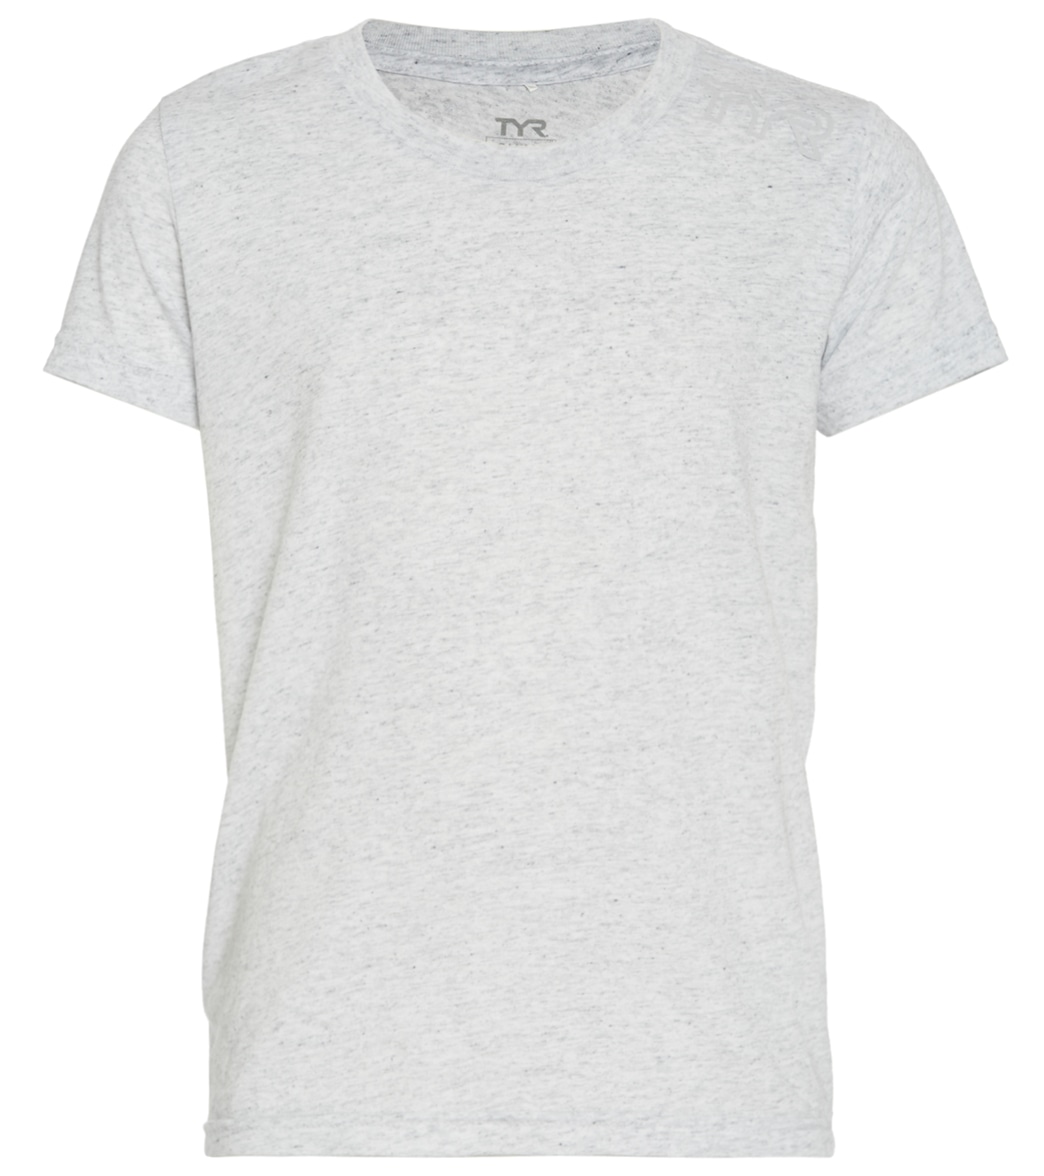 TYR Men's Youth Triblend Tee Shirt - White Heather Small Cotton/Polyester - Swimoutlet.com